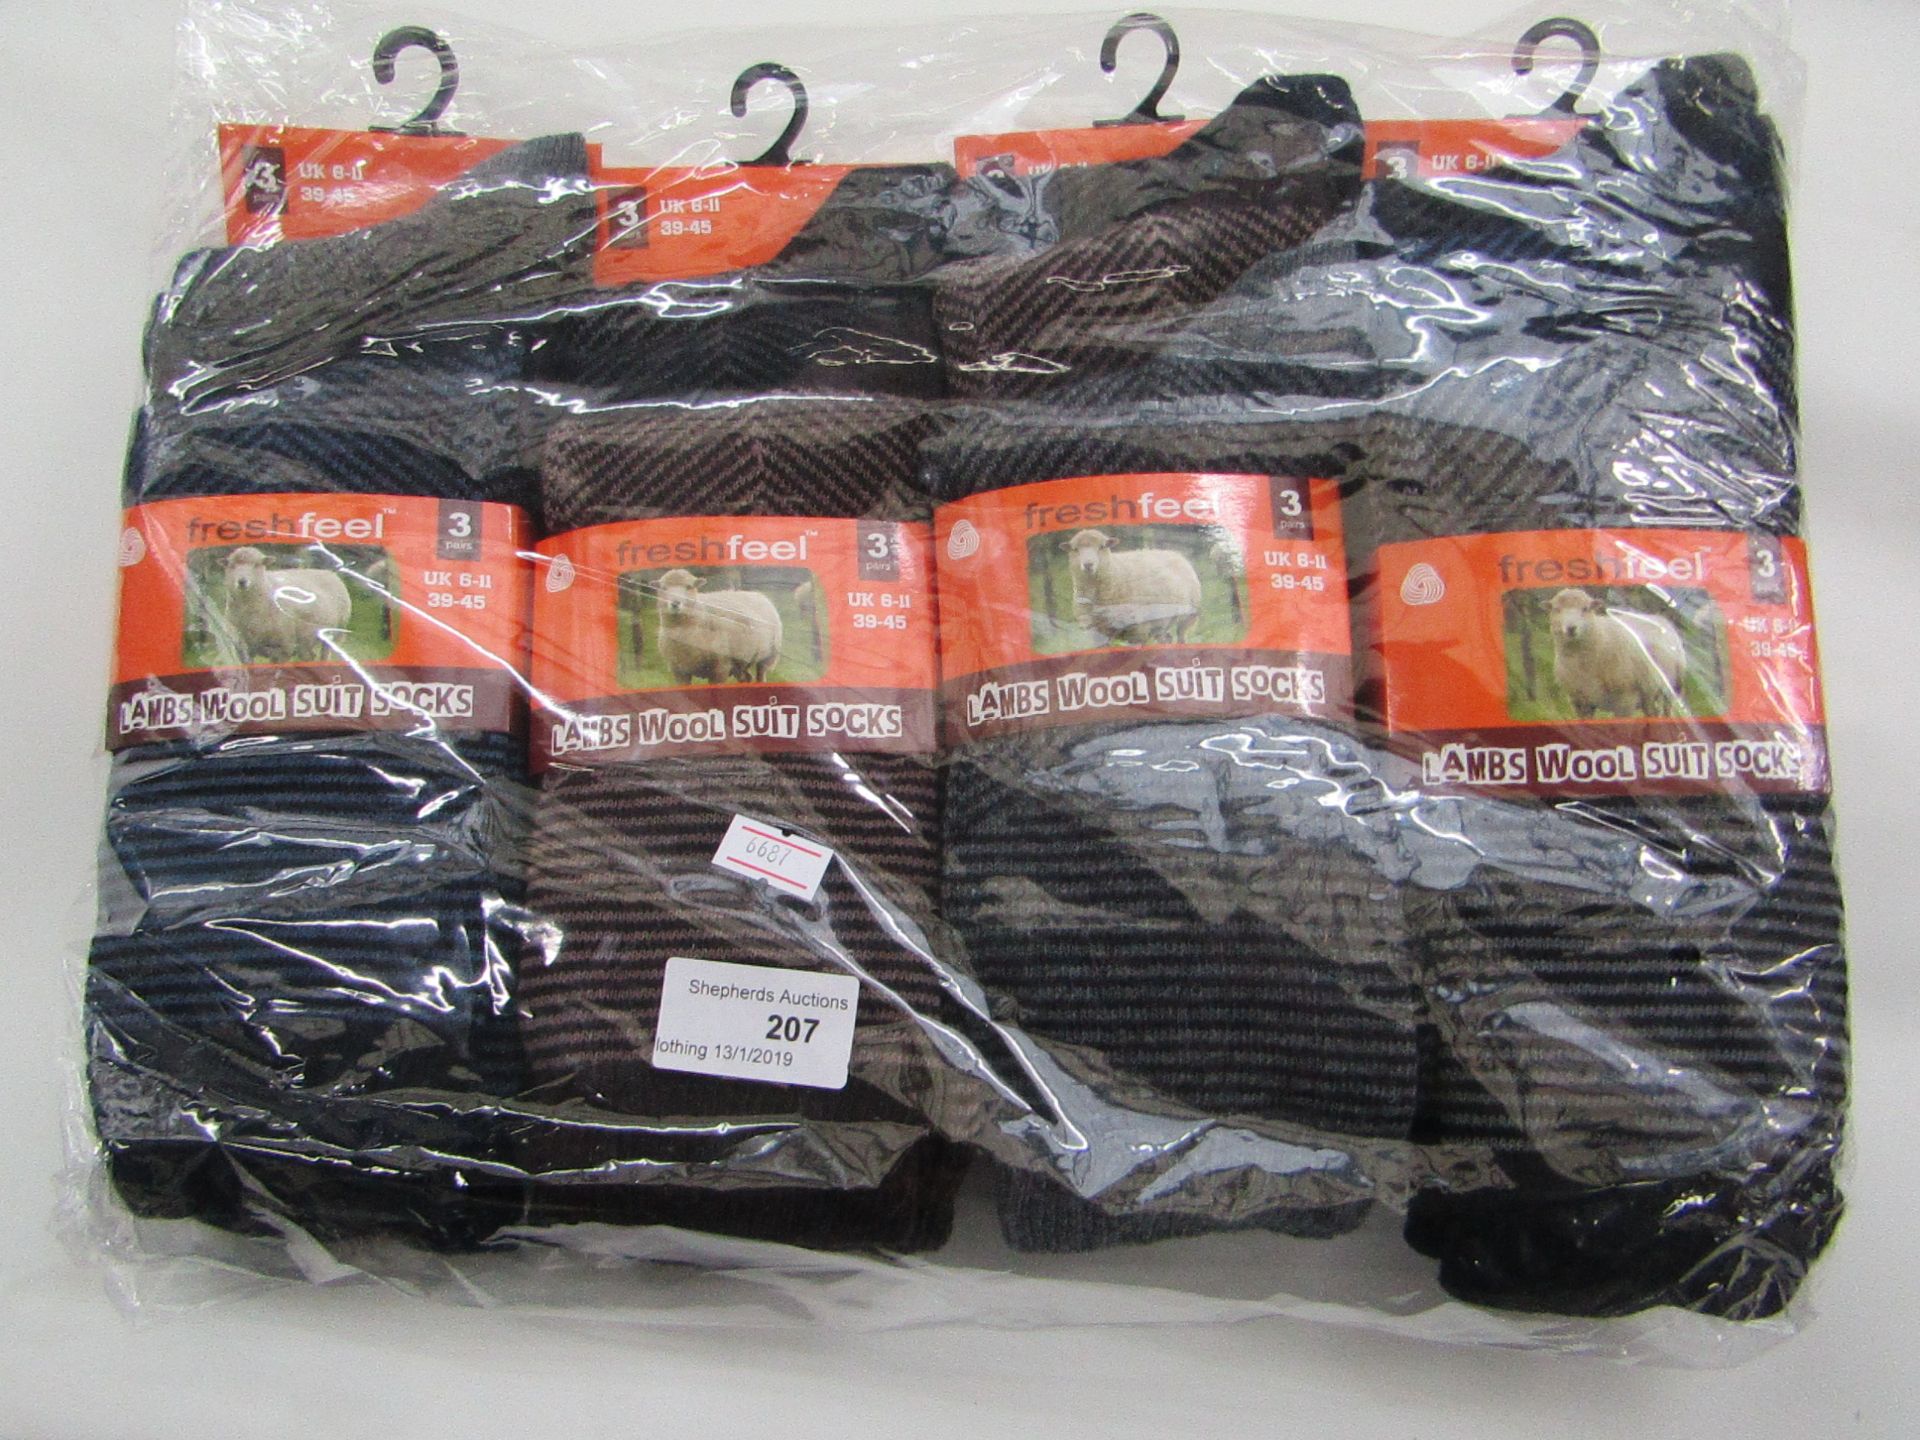 12 x pairs of Lambs Wool Suit Socks size 6-11 new & packaged